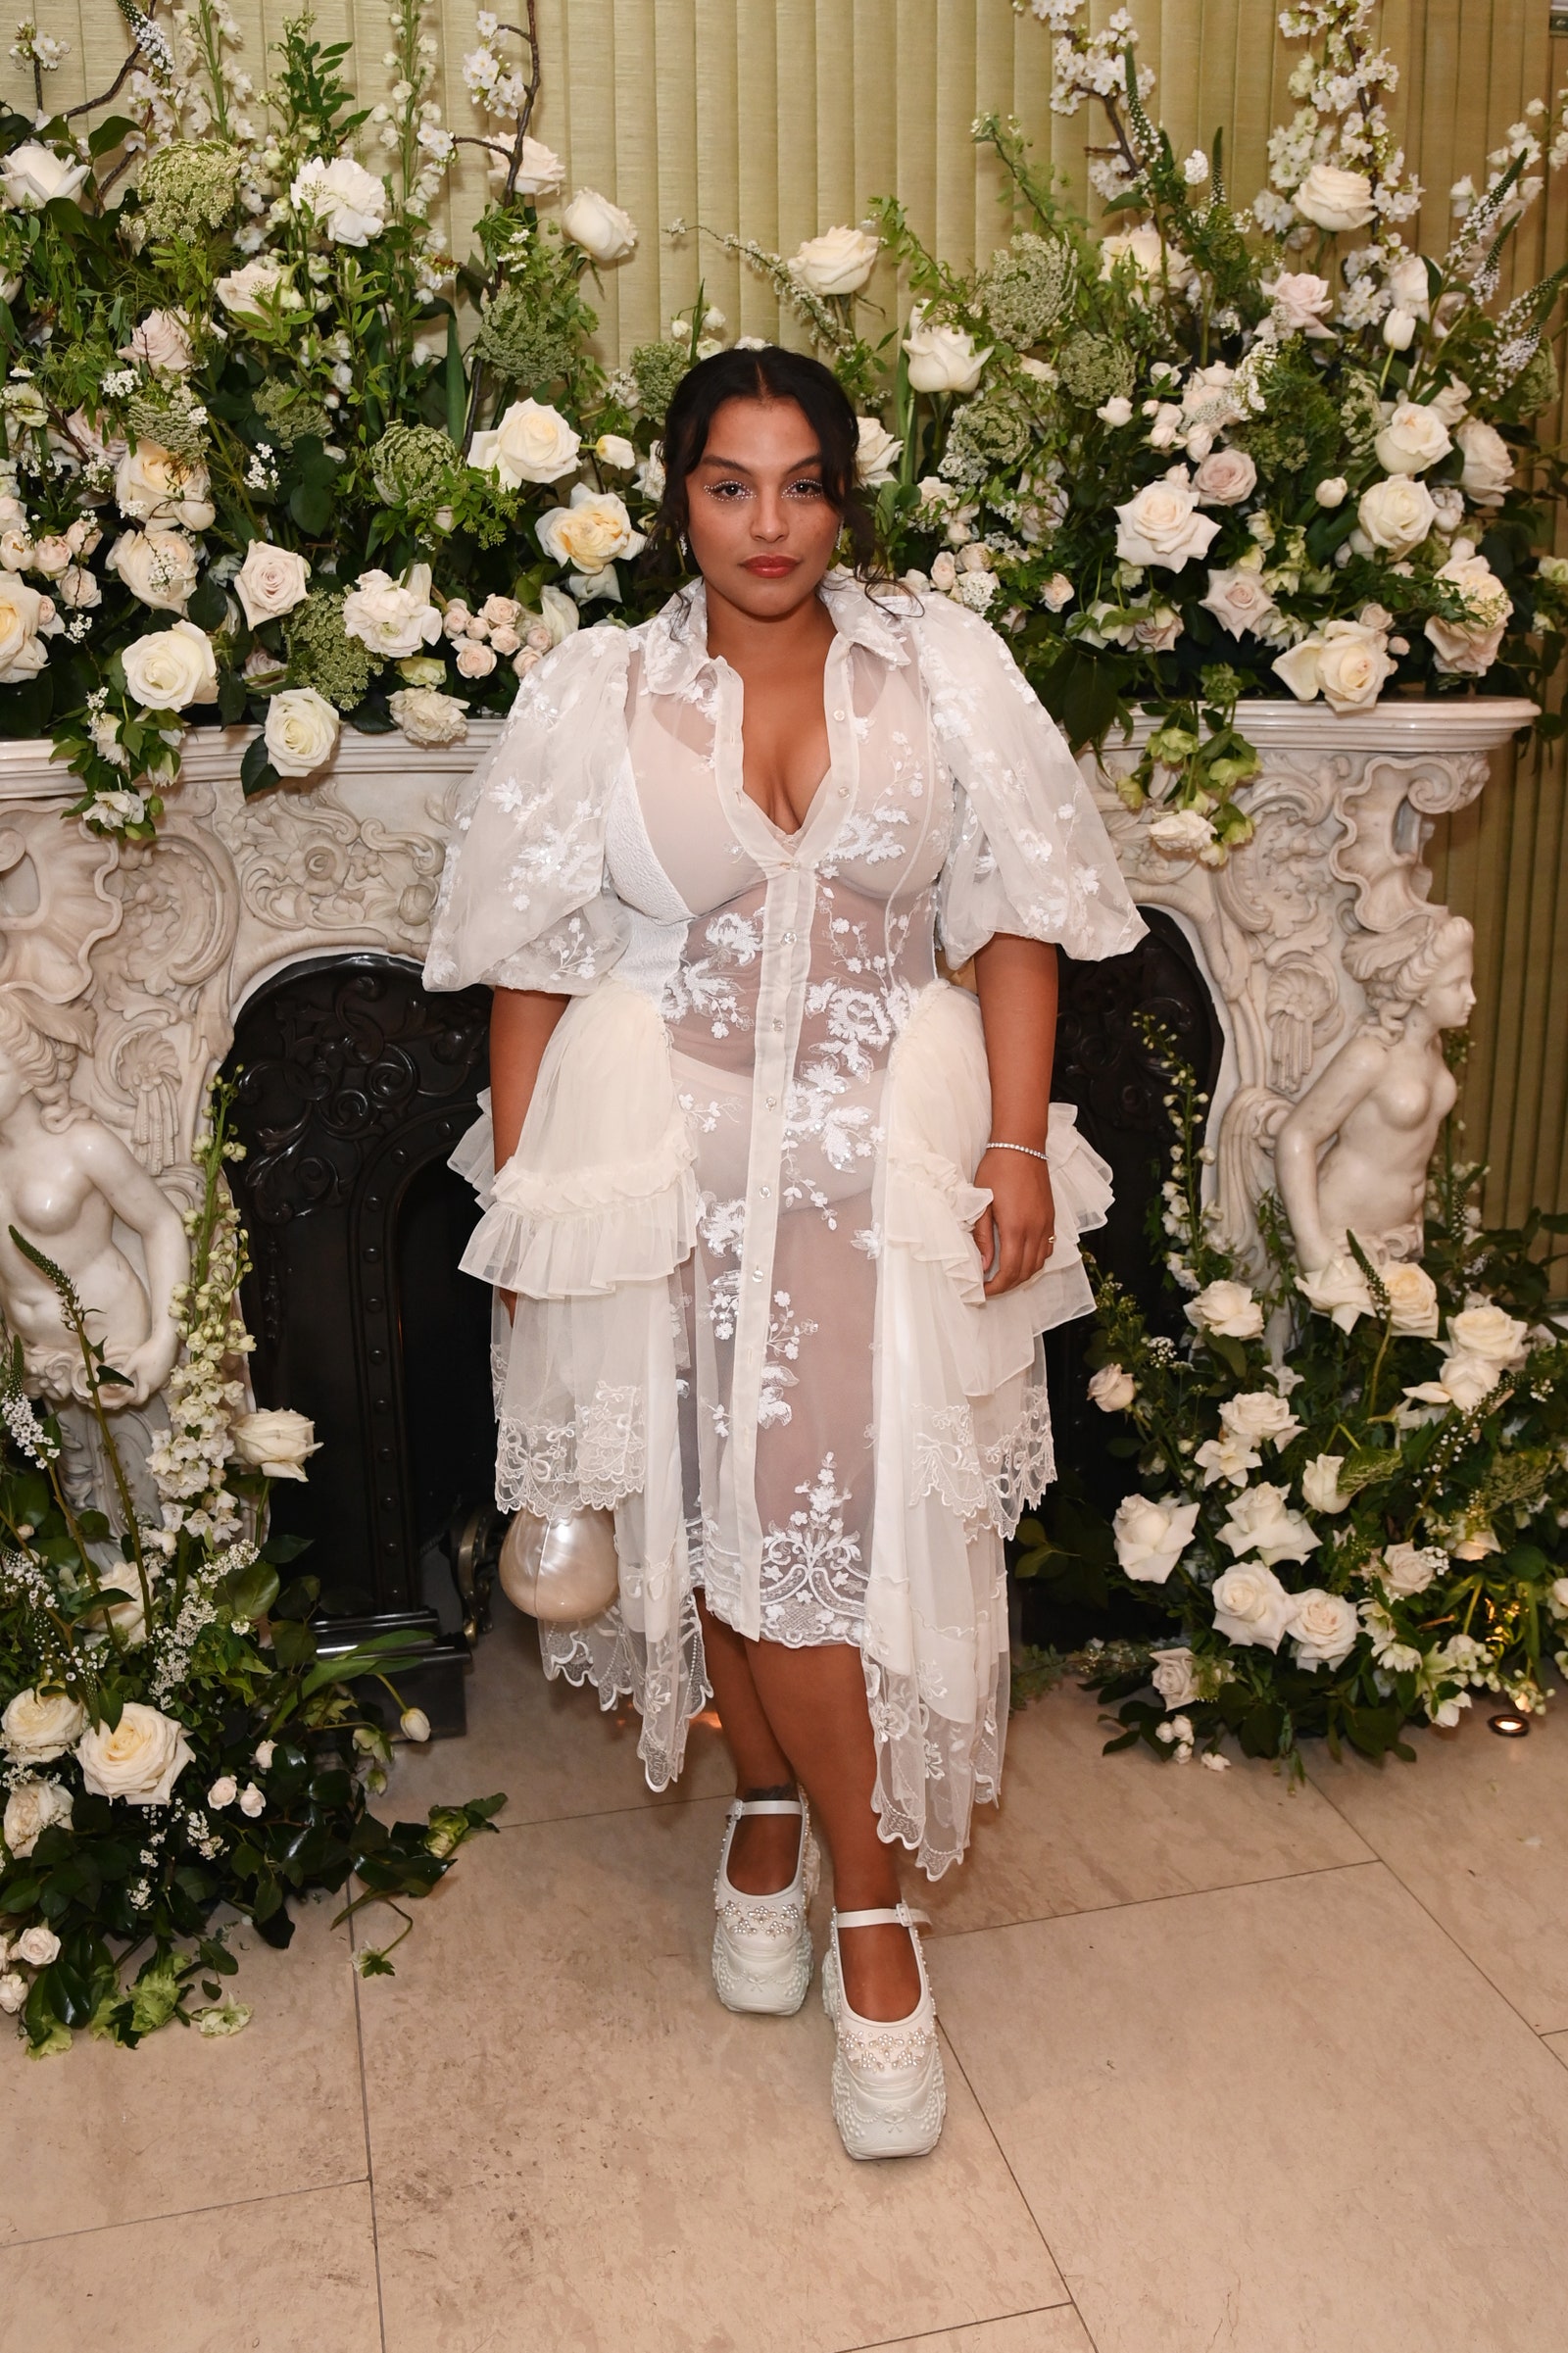 Paloma Elsesser in sheer white ruffles and embroidery.